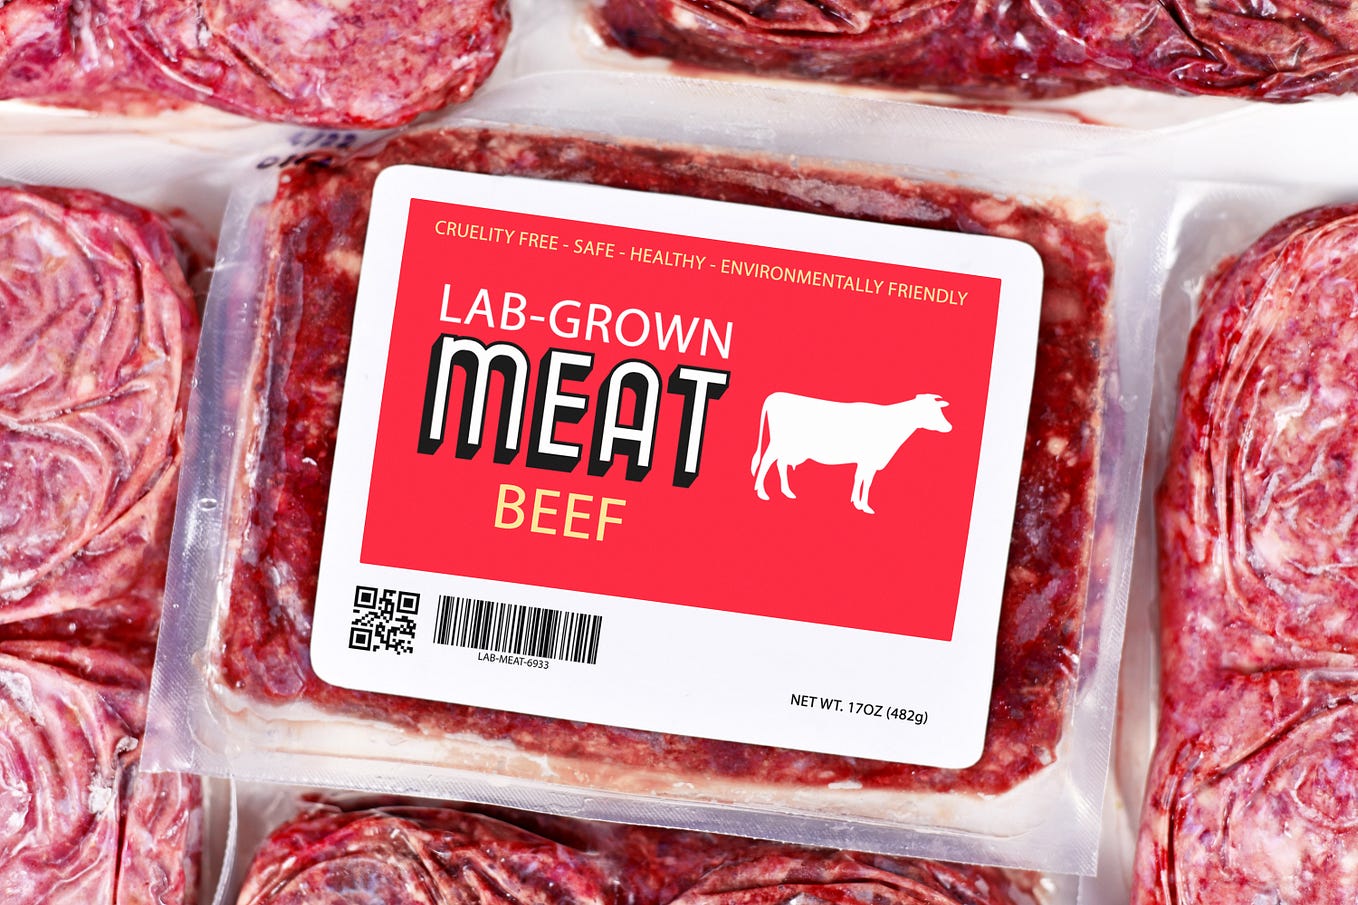 Picture of a package of lab-grown meat